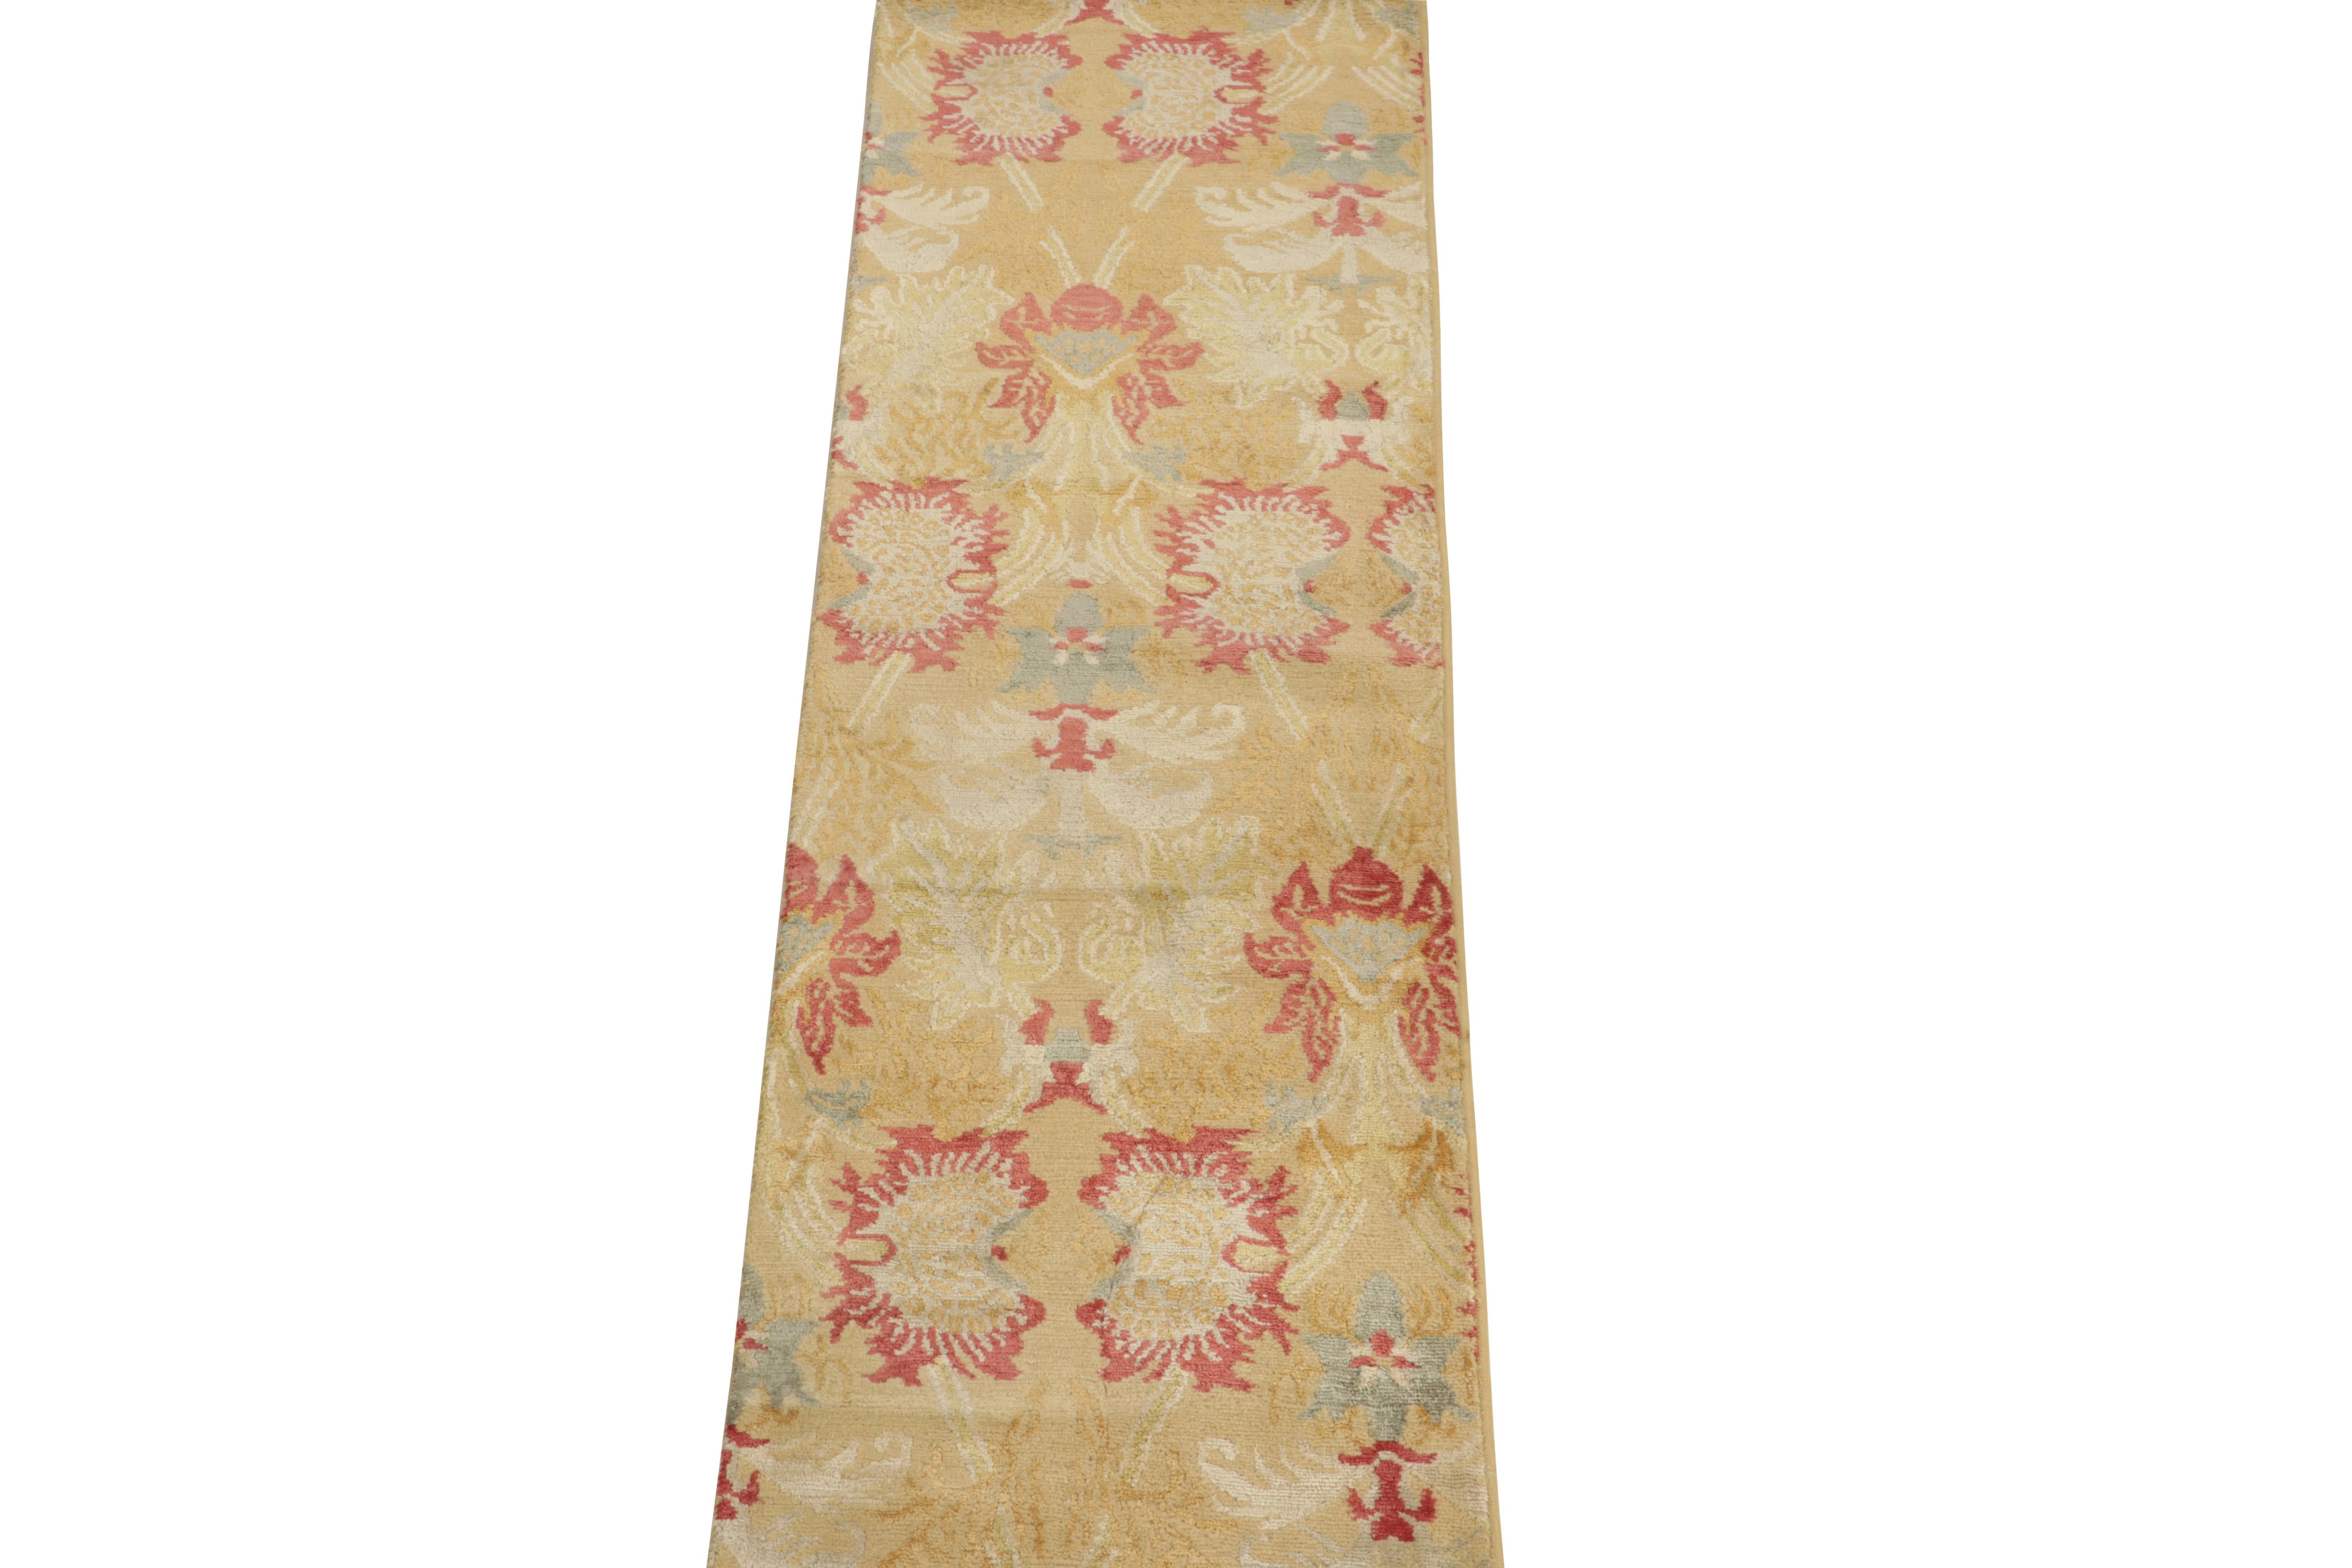 Hand-knotted in luxurious silk, a 2x6 contemporary runner from our European collection. The drawing carries our Toledo design inspired by Spanish antique floral rugs in an alluring play of gold, red & blue for a lustrous appeal. One of our most